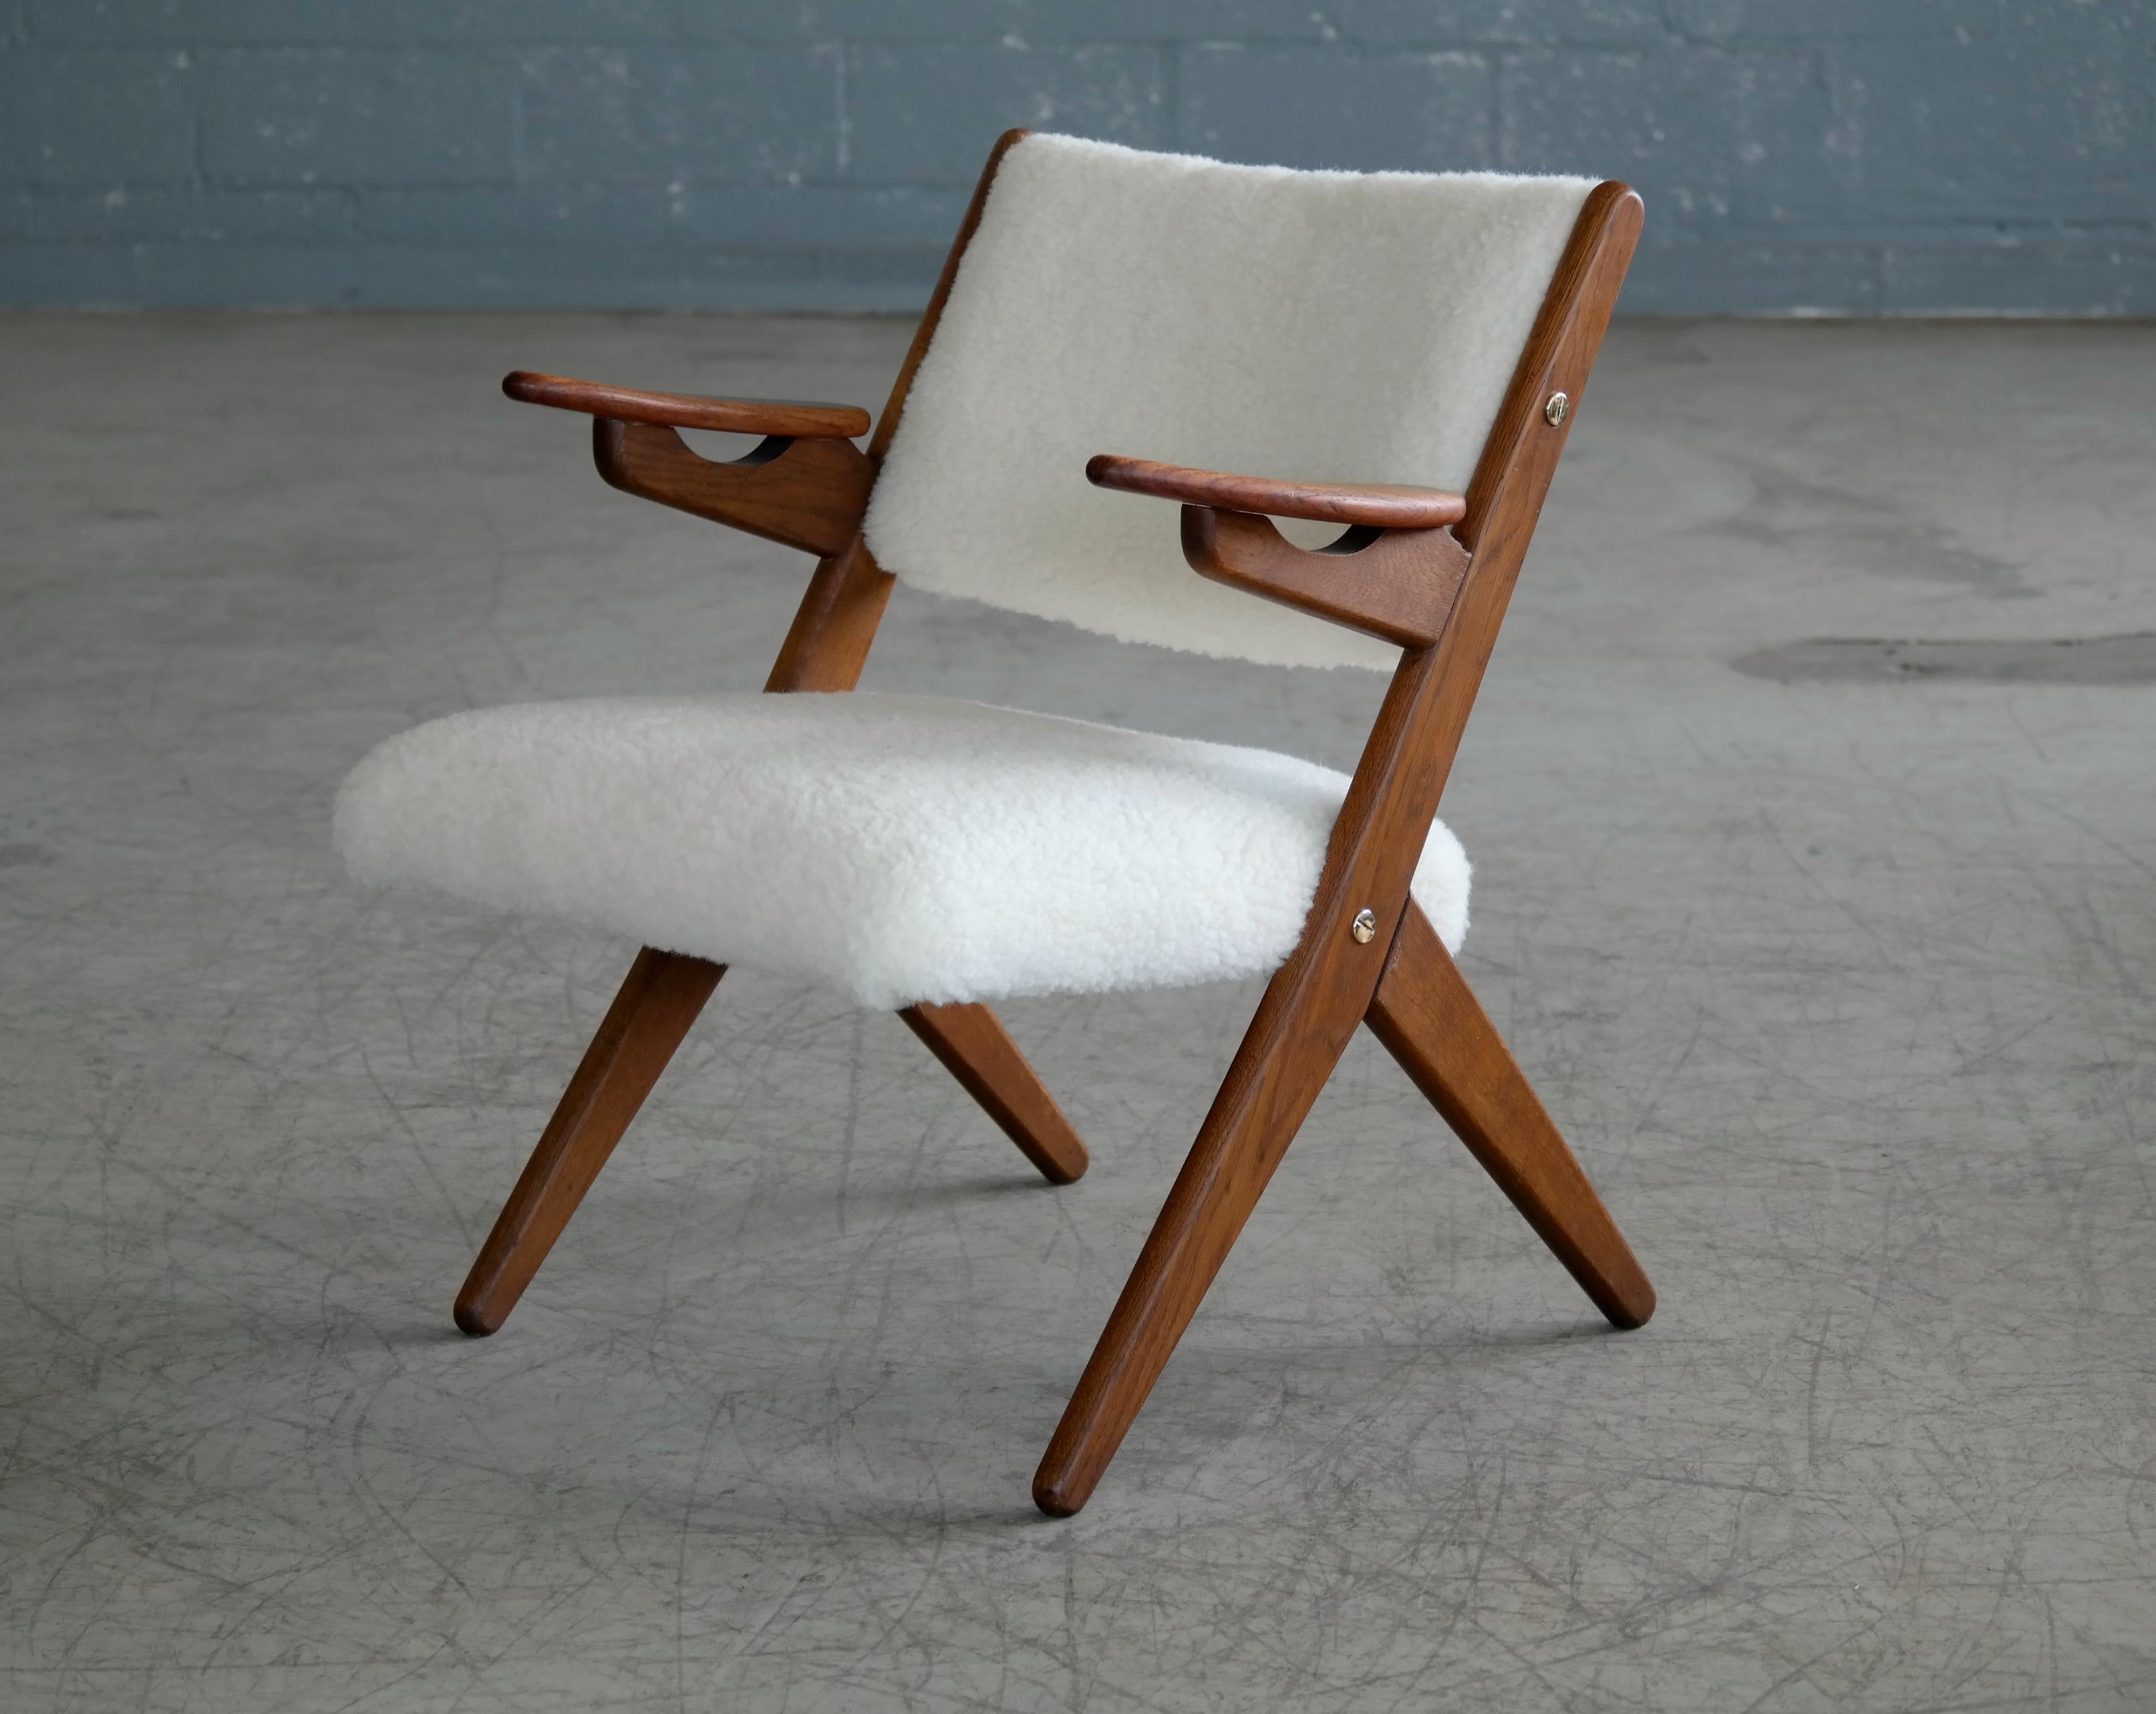 Sculptural and very beautiful 1950s easy chair made from solid teak with nice grain and color designed by Danish Designer, Arne Hovmand-Olsen. The wood frame shows appropriate age wear with minor scuffing and scratches and patina and surface wear on